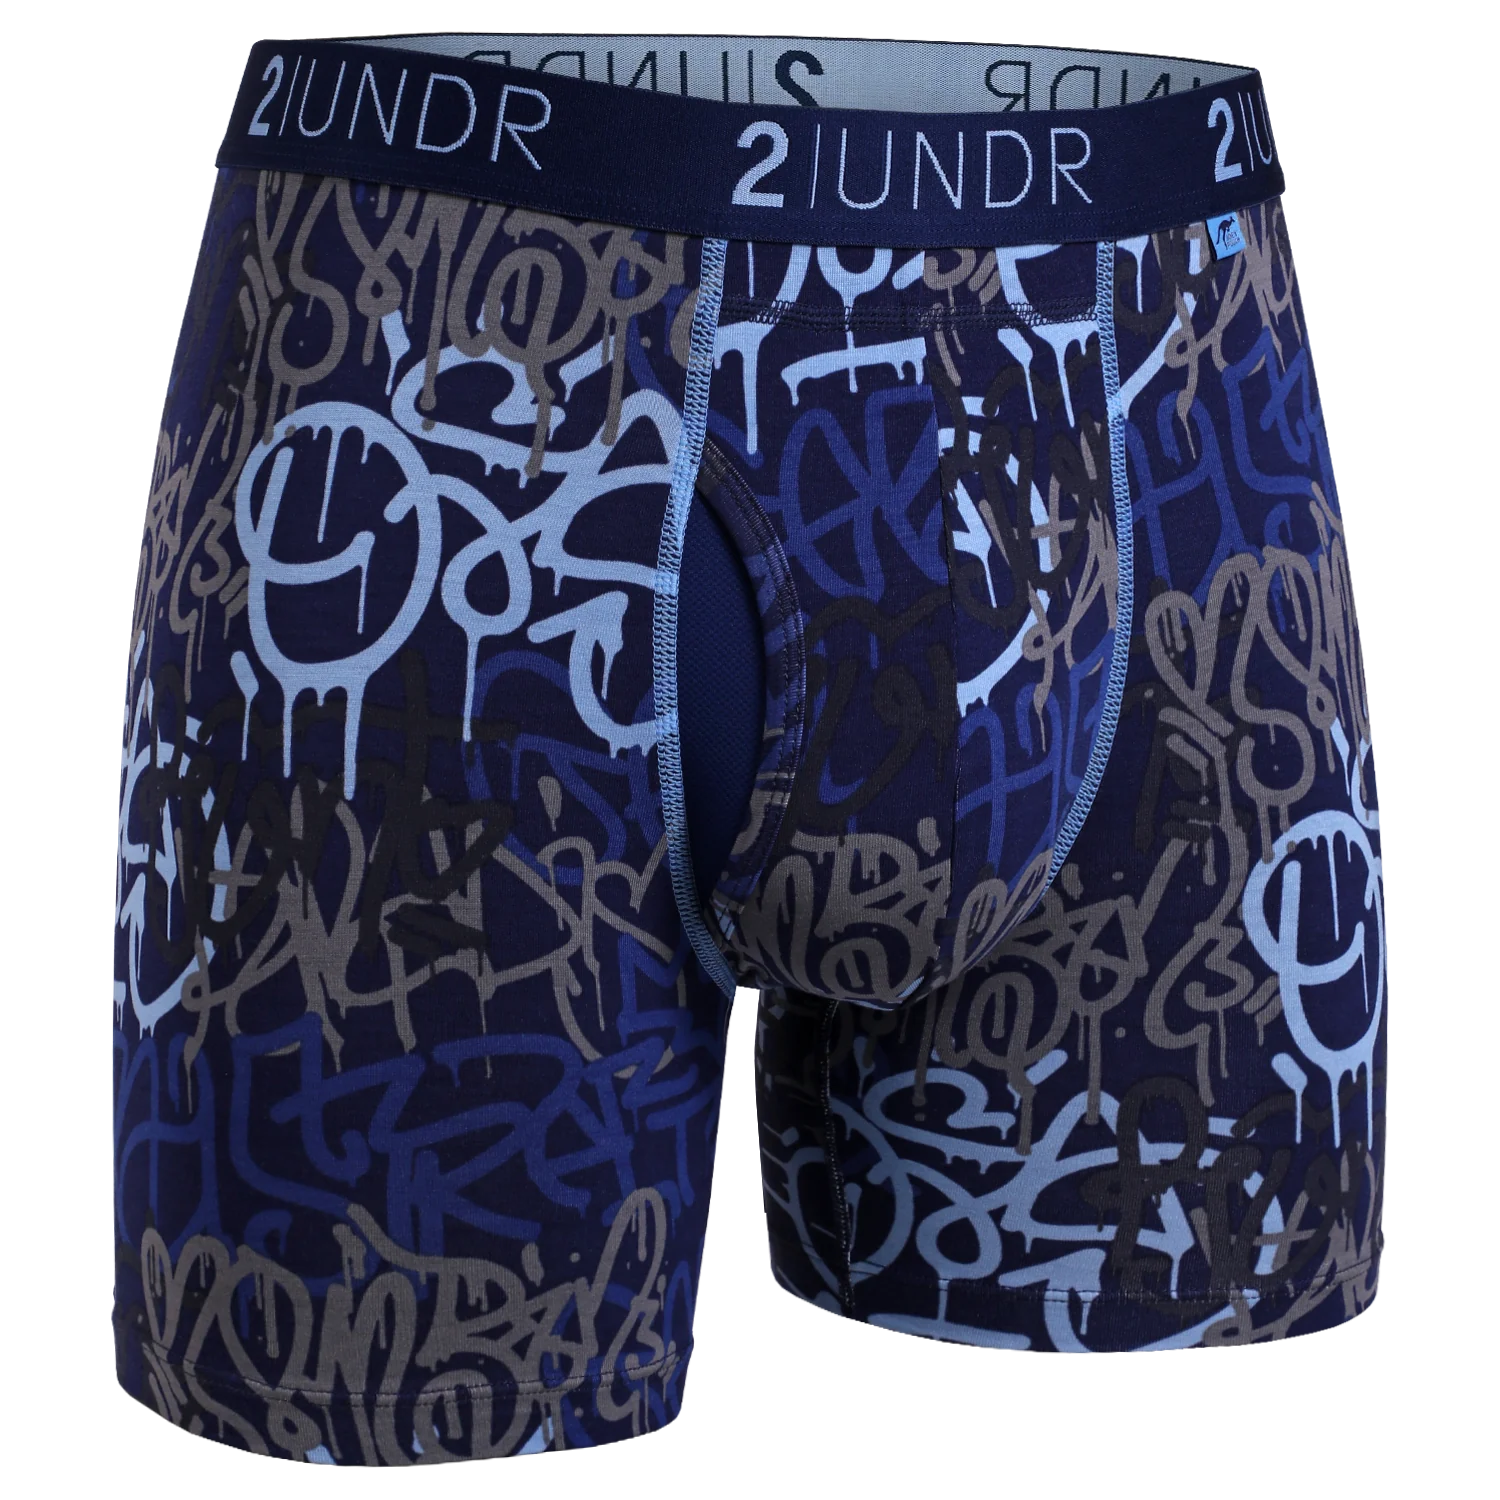 Boxer 2Undr Swing Shift - Drippings